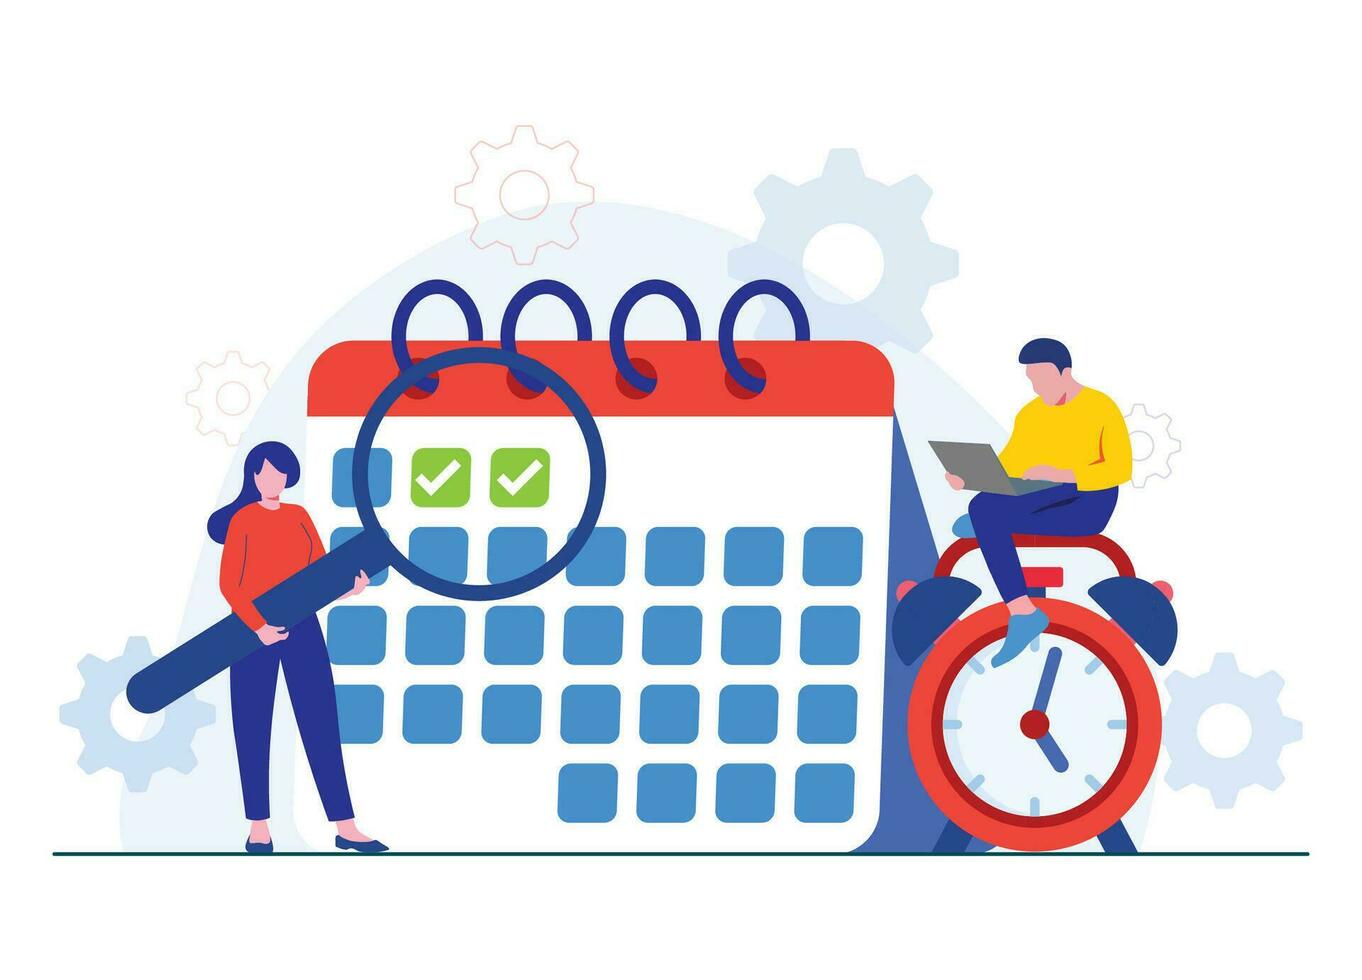 Schedule management, Planning day, Employee planning work tasks, Planning and organizing upcoming tasks using a calendar, Time management, and Completing work tasks vector